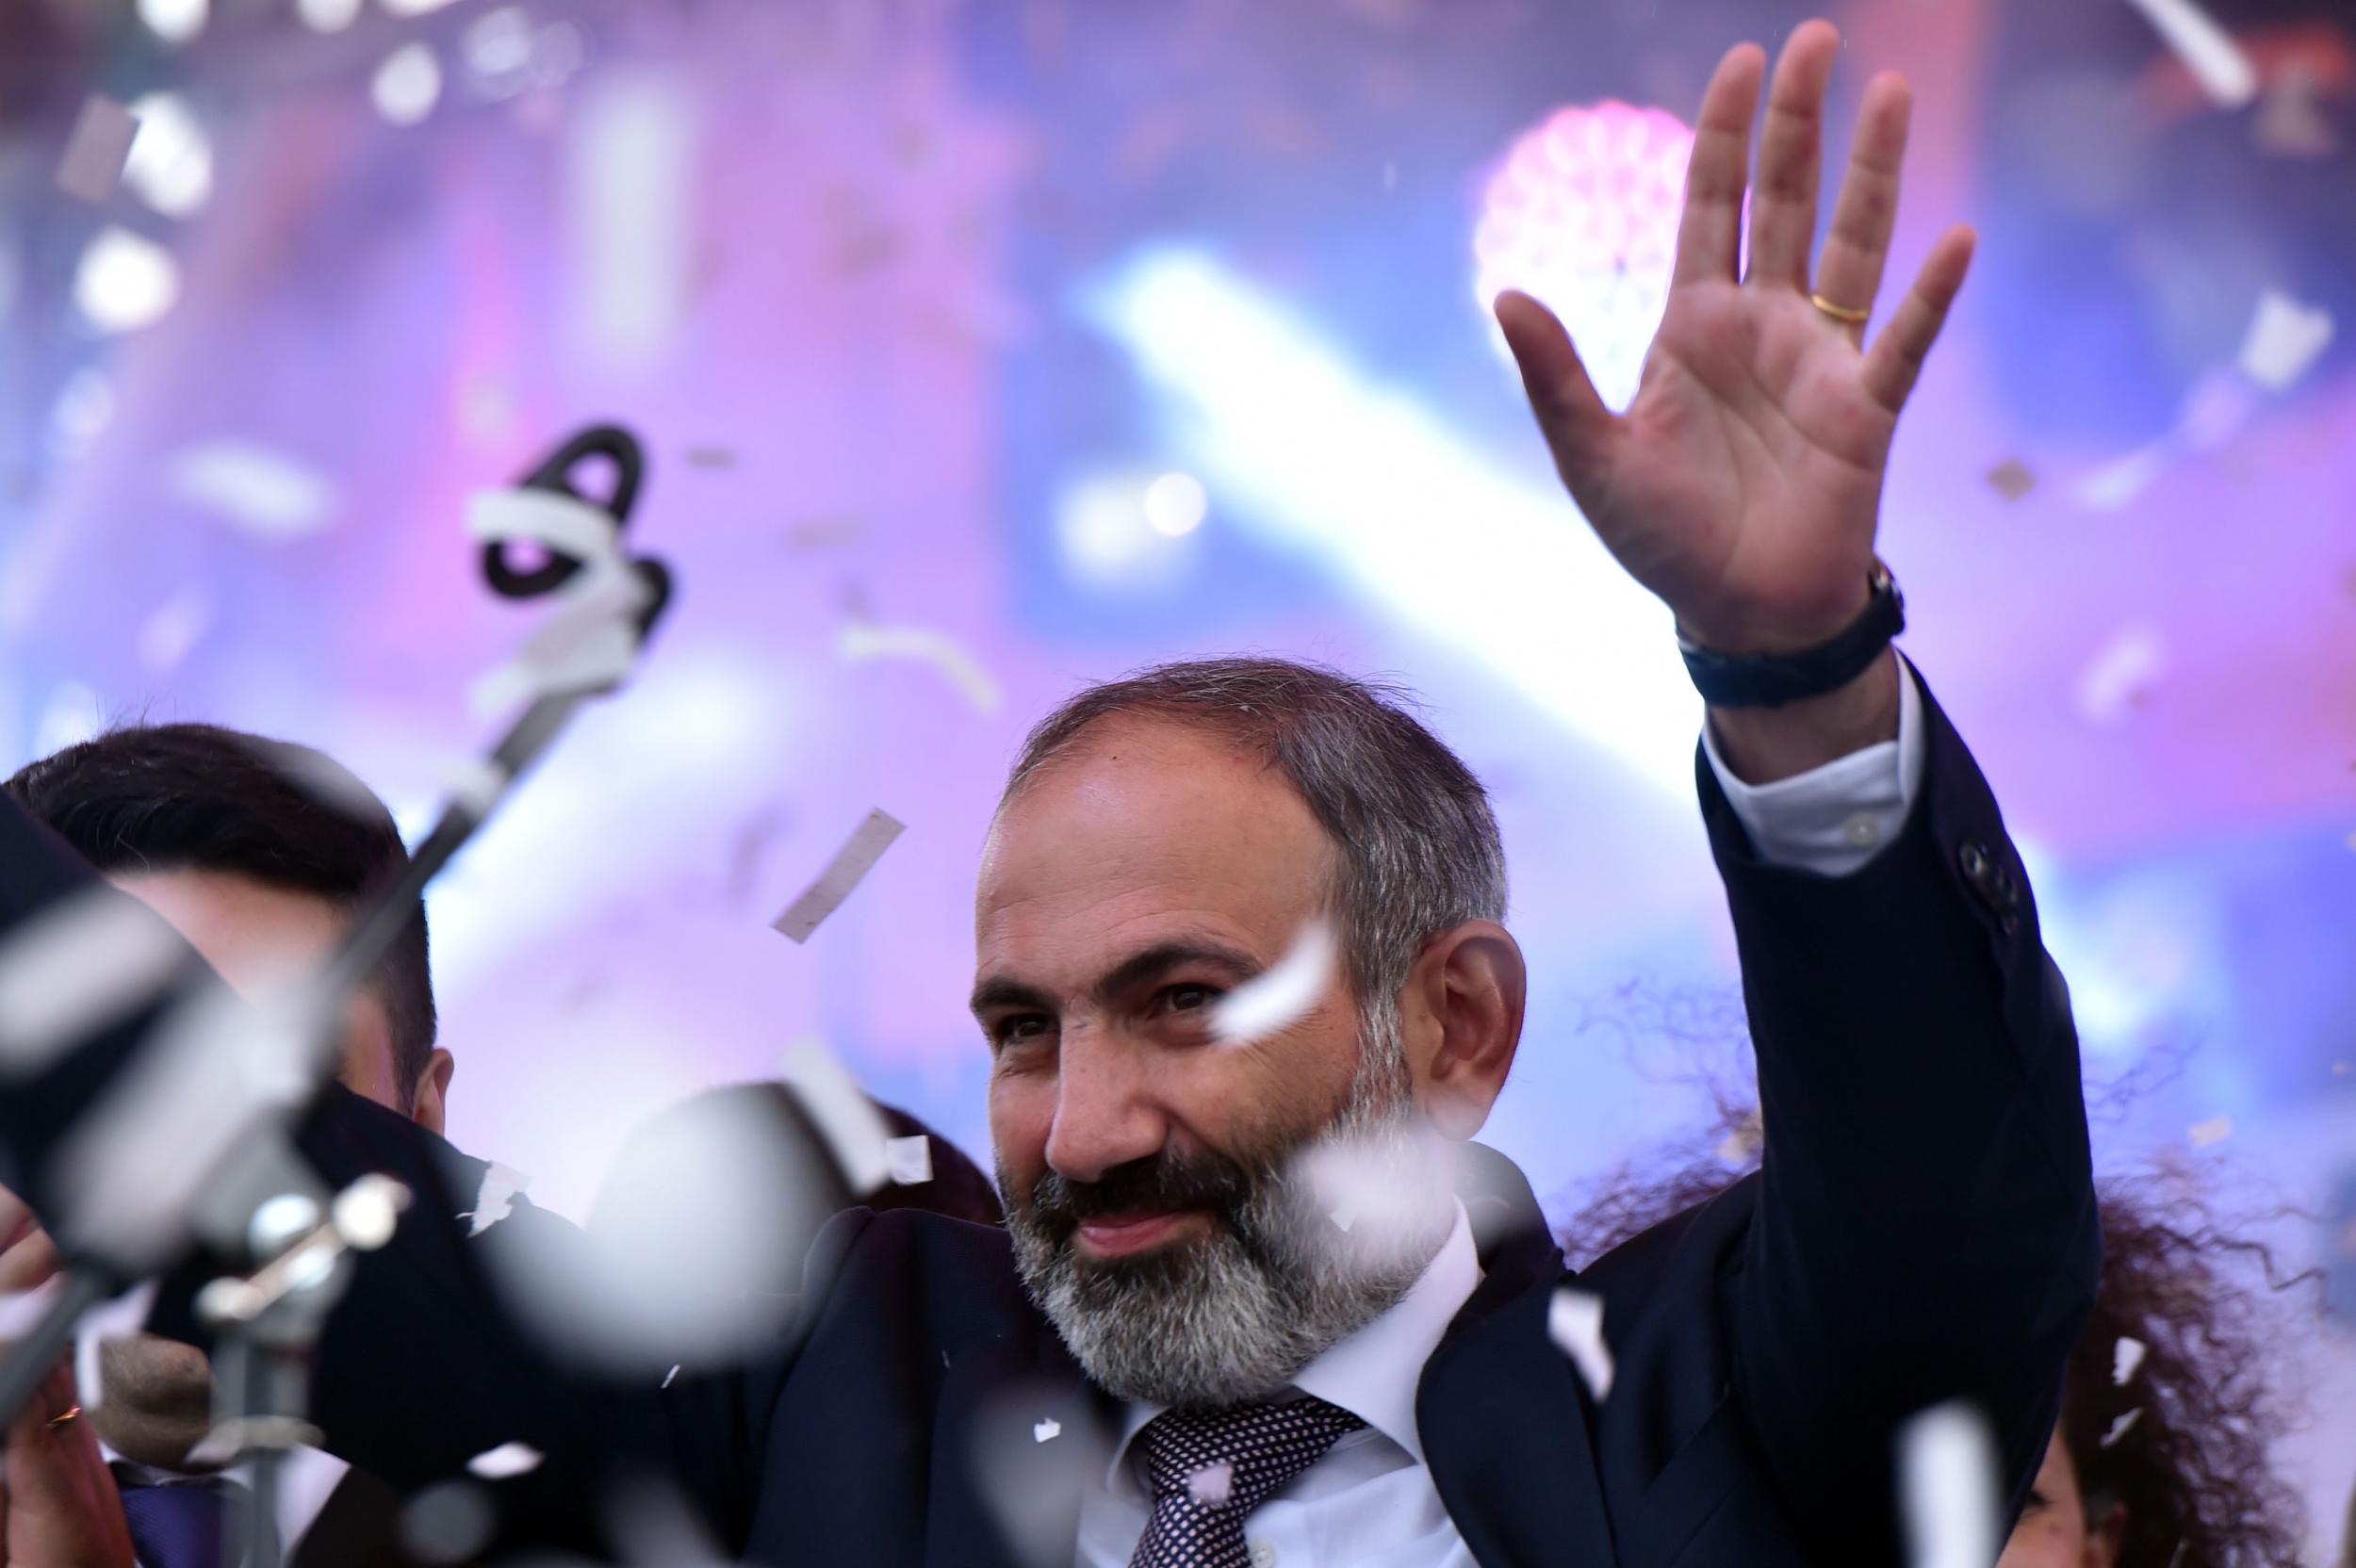 Armenian opposition leader Nikol Pashinyan waves to supporters after being elected prime minister in Yerevan’s Republic Square